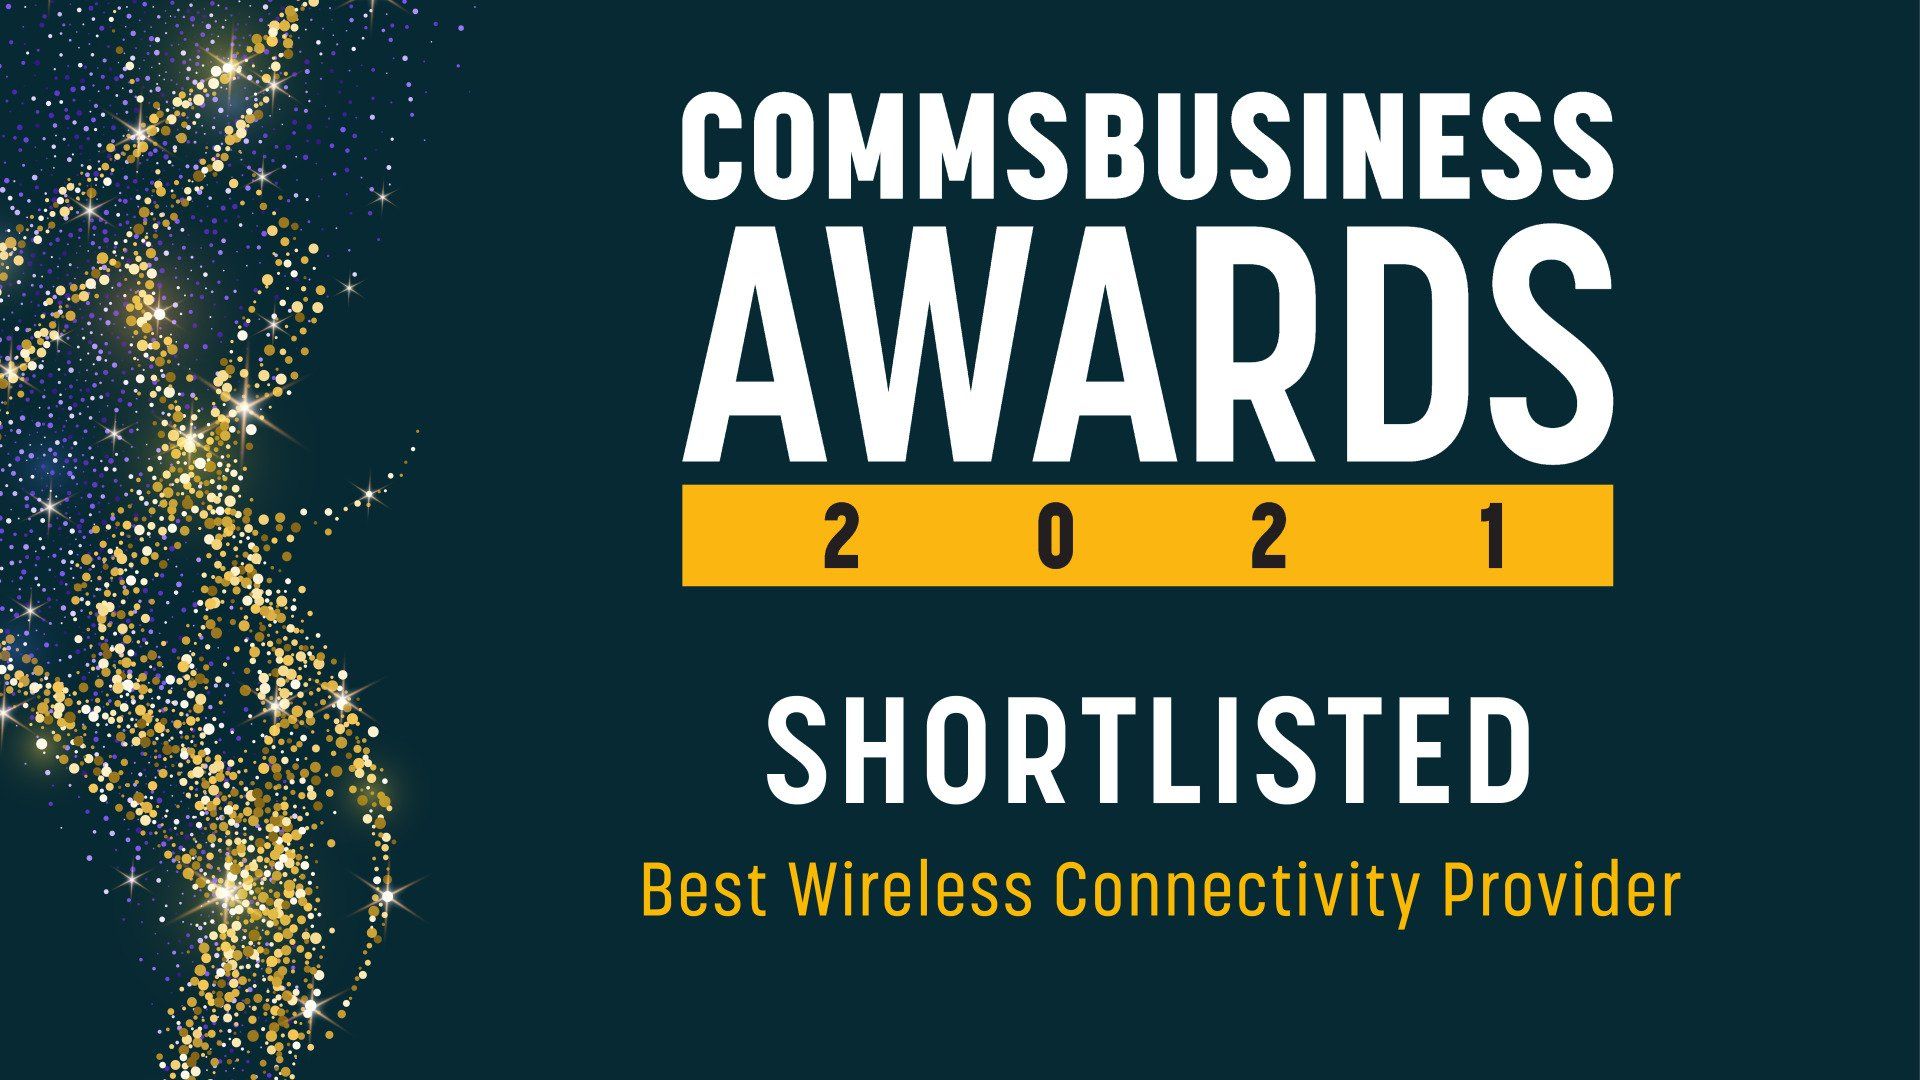 COMMS BUSINESS AWARDS 2021 SHORTLISTED